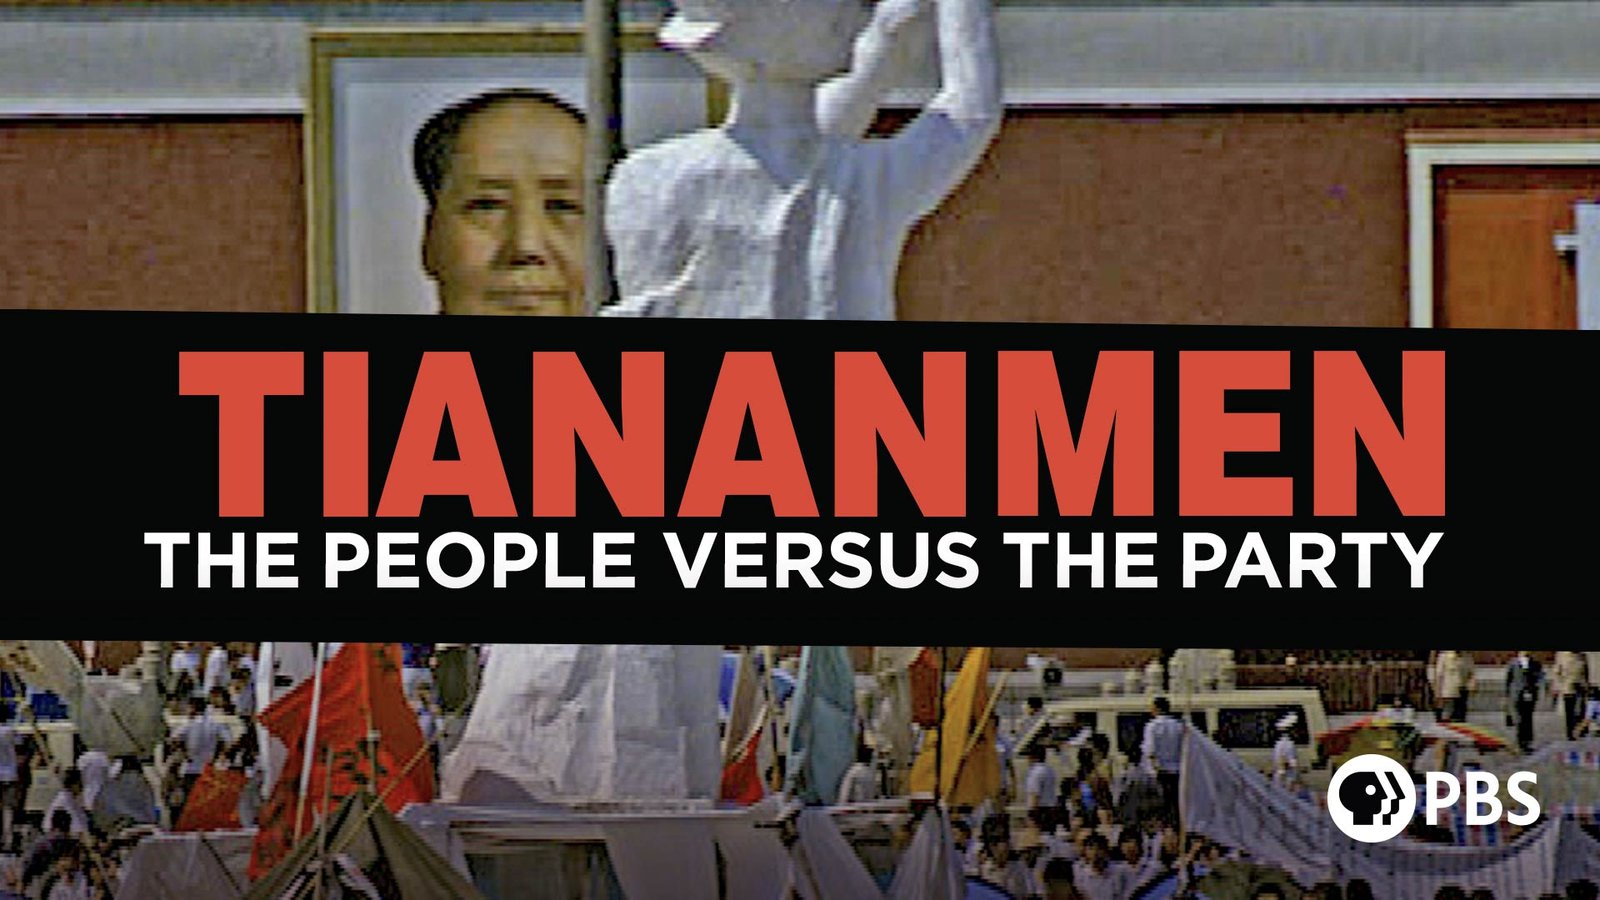 Tiananmen: The People Versus the Party